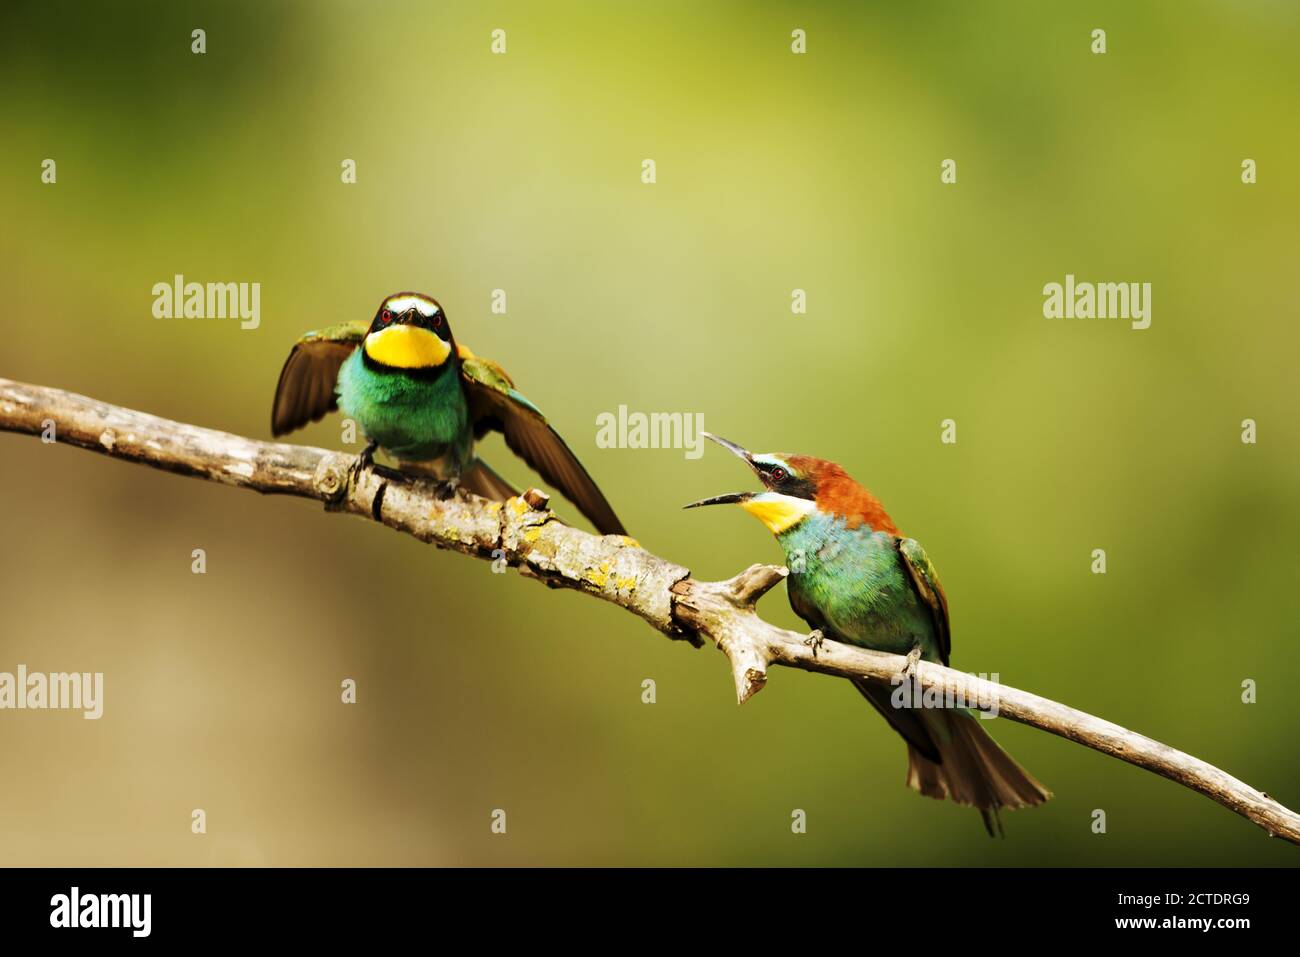 Merops apiaster, European bee-eaters are seriously debating the best site to build their nest. Stock Photo